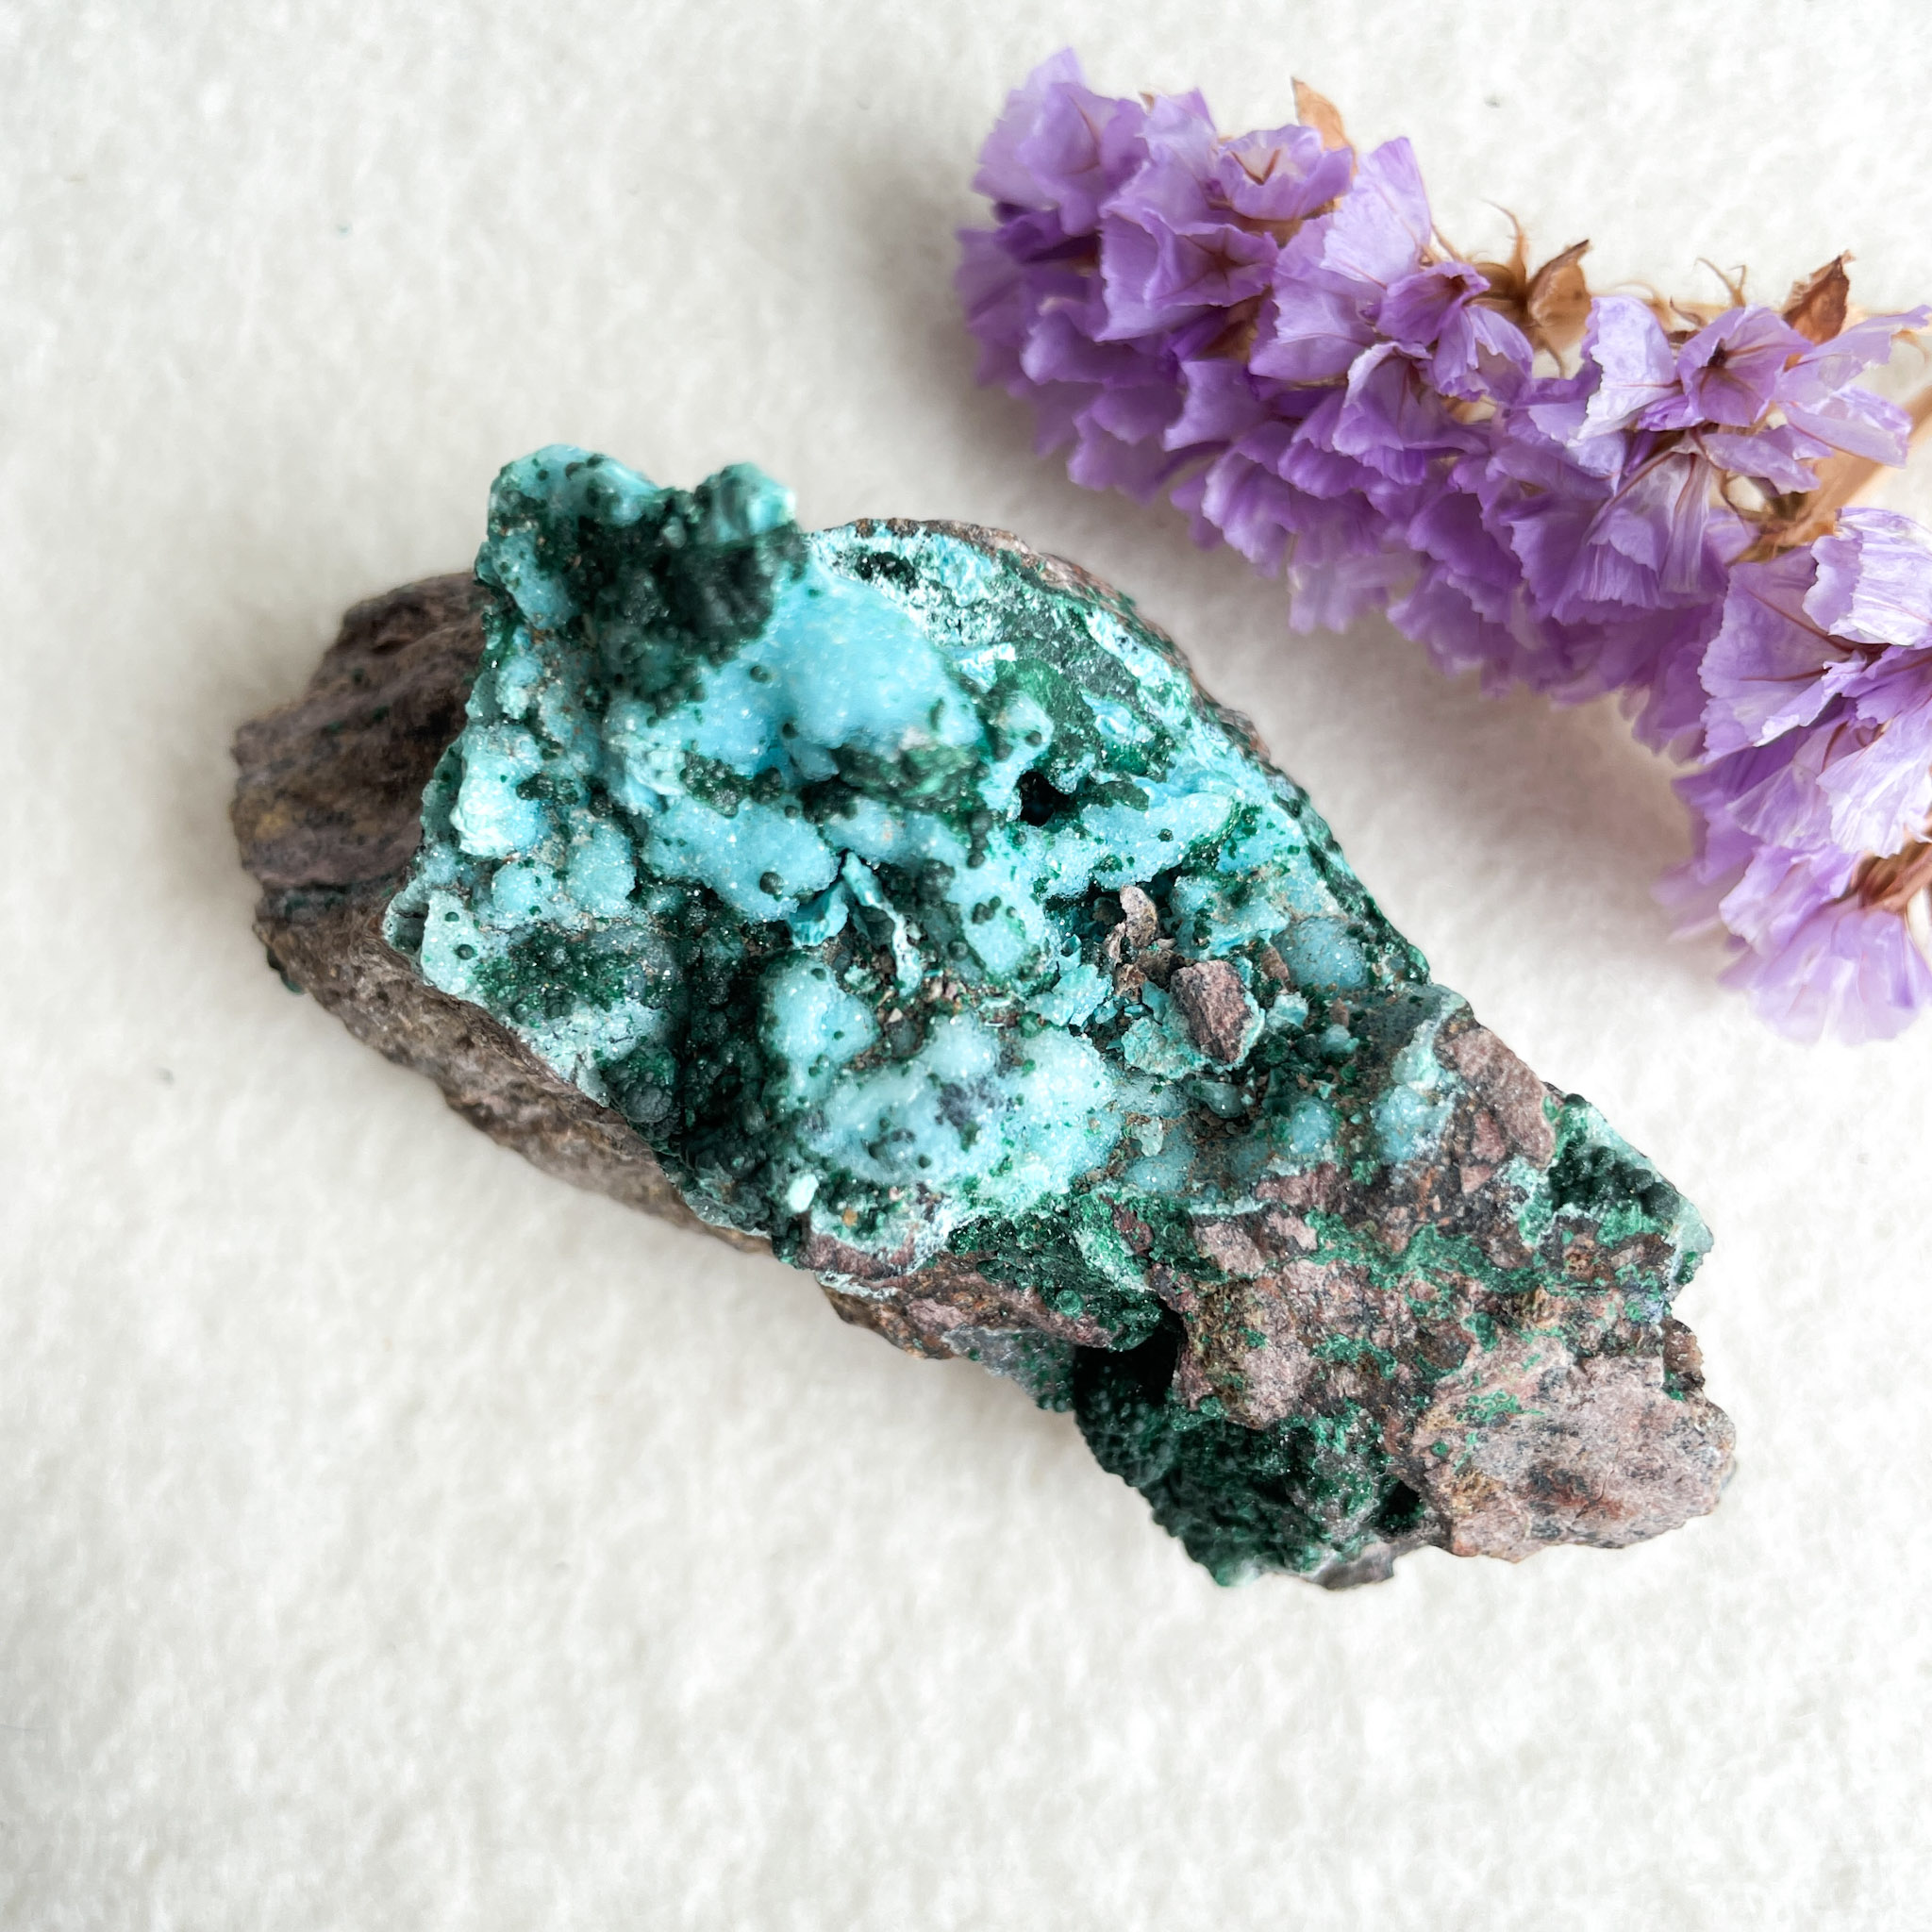 A vibrant turquoise mineral specimen juxtaposed with a cluster of dried purple flowers on a textured off-white background.